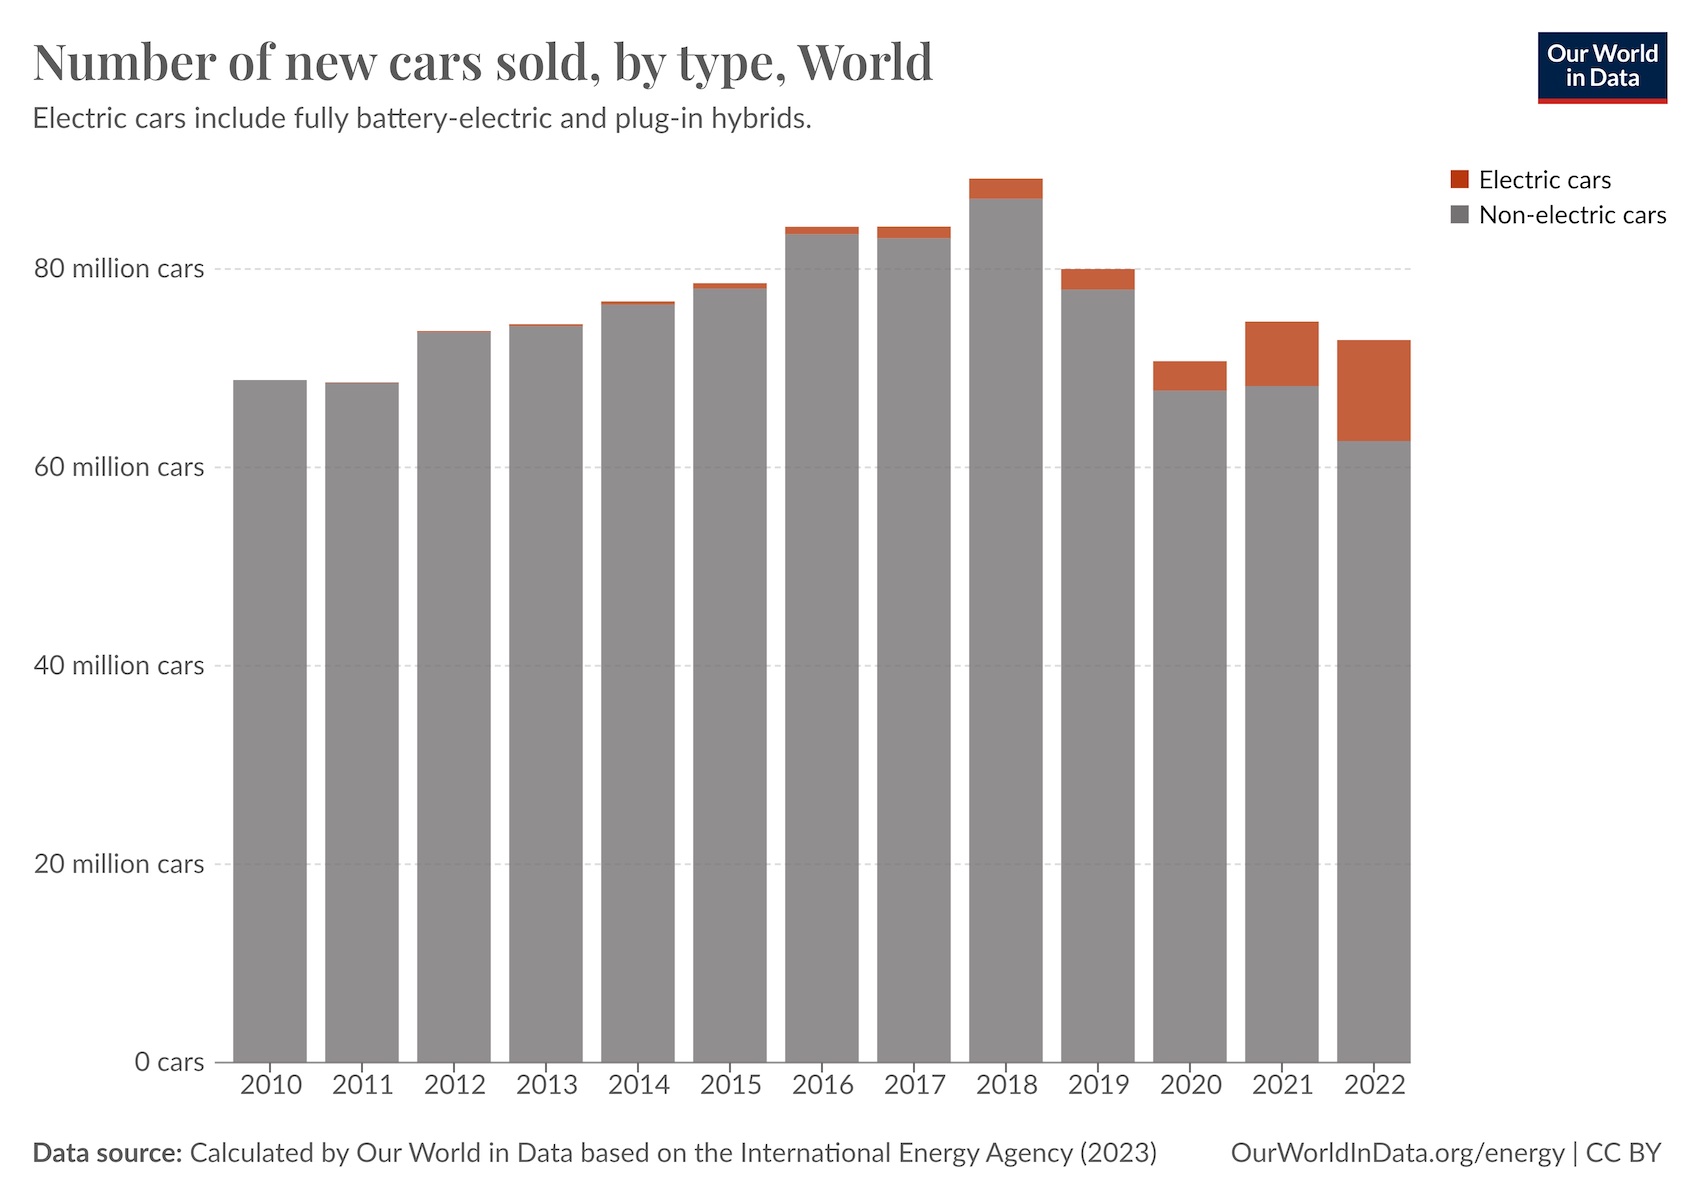 Bar chart showing the annual number of electric and non-electric cars sold globally from 2010 to 2022, with electric car sales increasing over time.